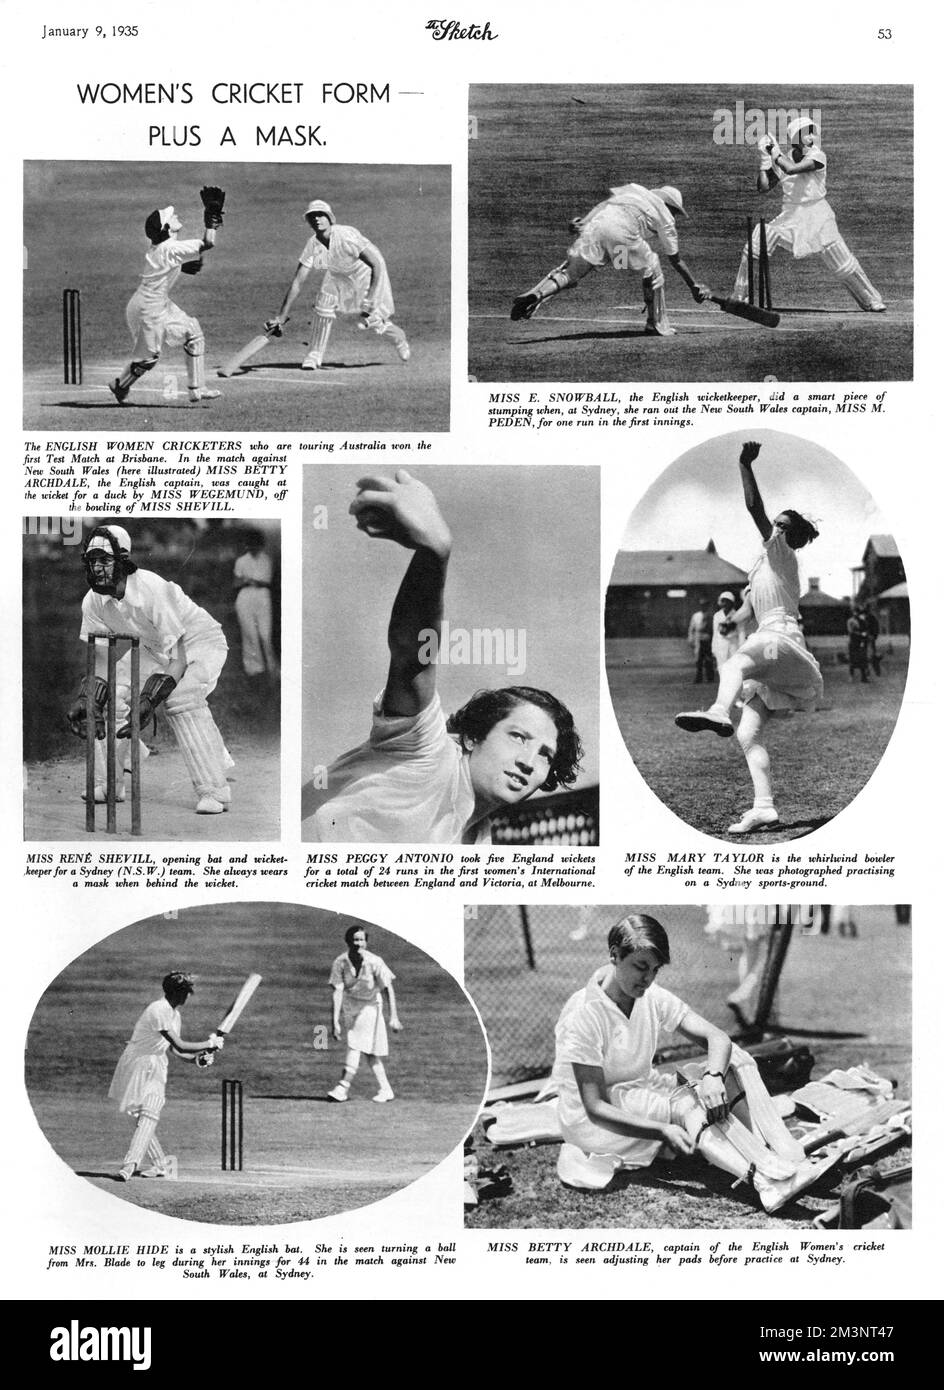 English women cricketers touring Australia in 1935.  The bottom right picture shows the England captain, Miss Betty Archdale adjusting her shin pads during practice.  Right middle shows Miss Mary Taylor, whirlwind English bowler and bottom left picture depicts Miss Mollie Hide, 'a stylish English bat' turning a ball from Mrs Blade to leg during her innings for 44 in the match against New South Wales at Sydney.  Middle picture shows Miss Peggy Antonio who took five English wickets for a total of 24 runs in the first women's International cricket match between England and Victoria, at Melbour Stock Photo